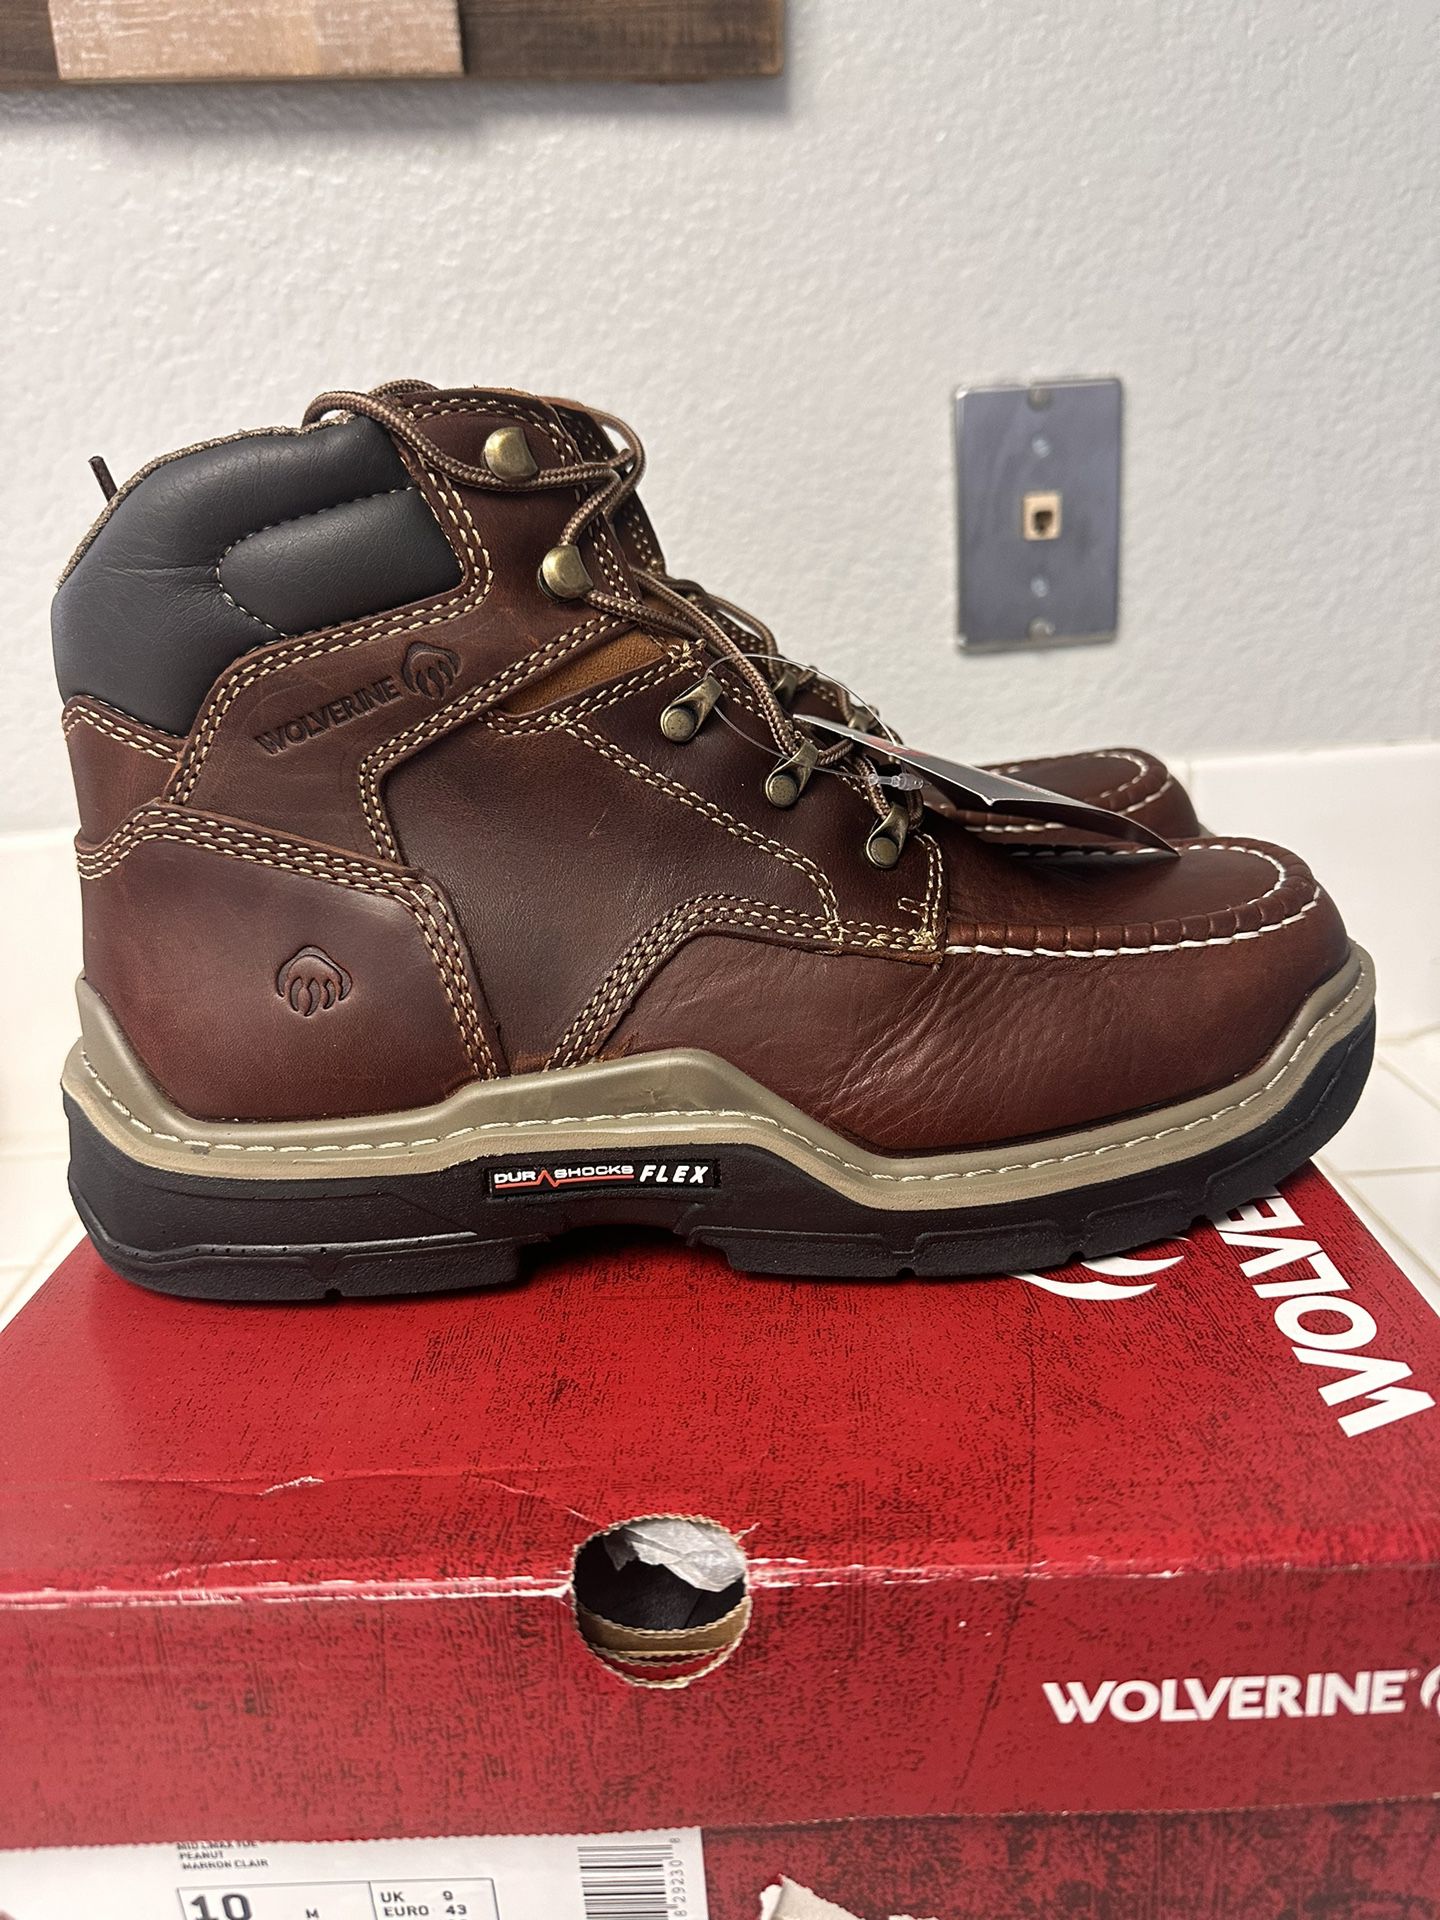 Brand New Wolverine Work Boots For Men. Size 10. Carbon Toe 